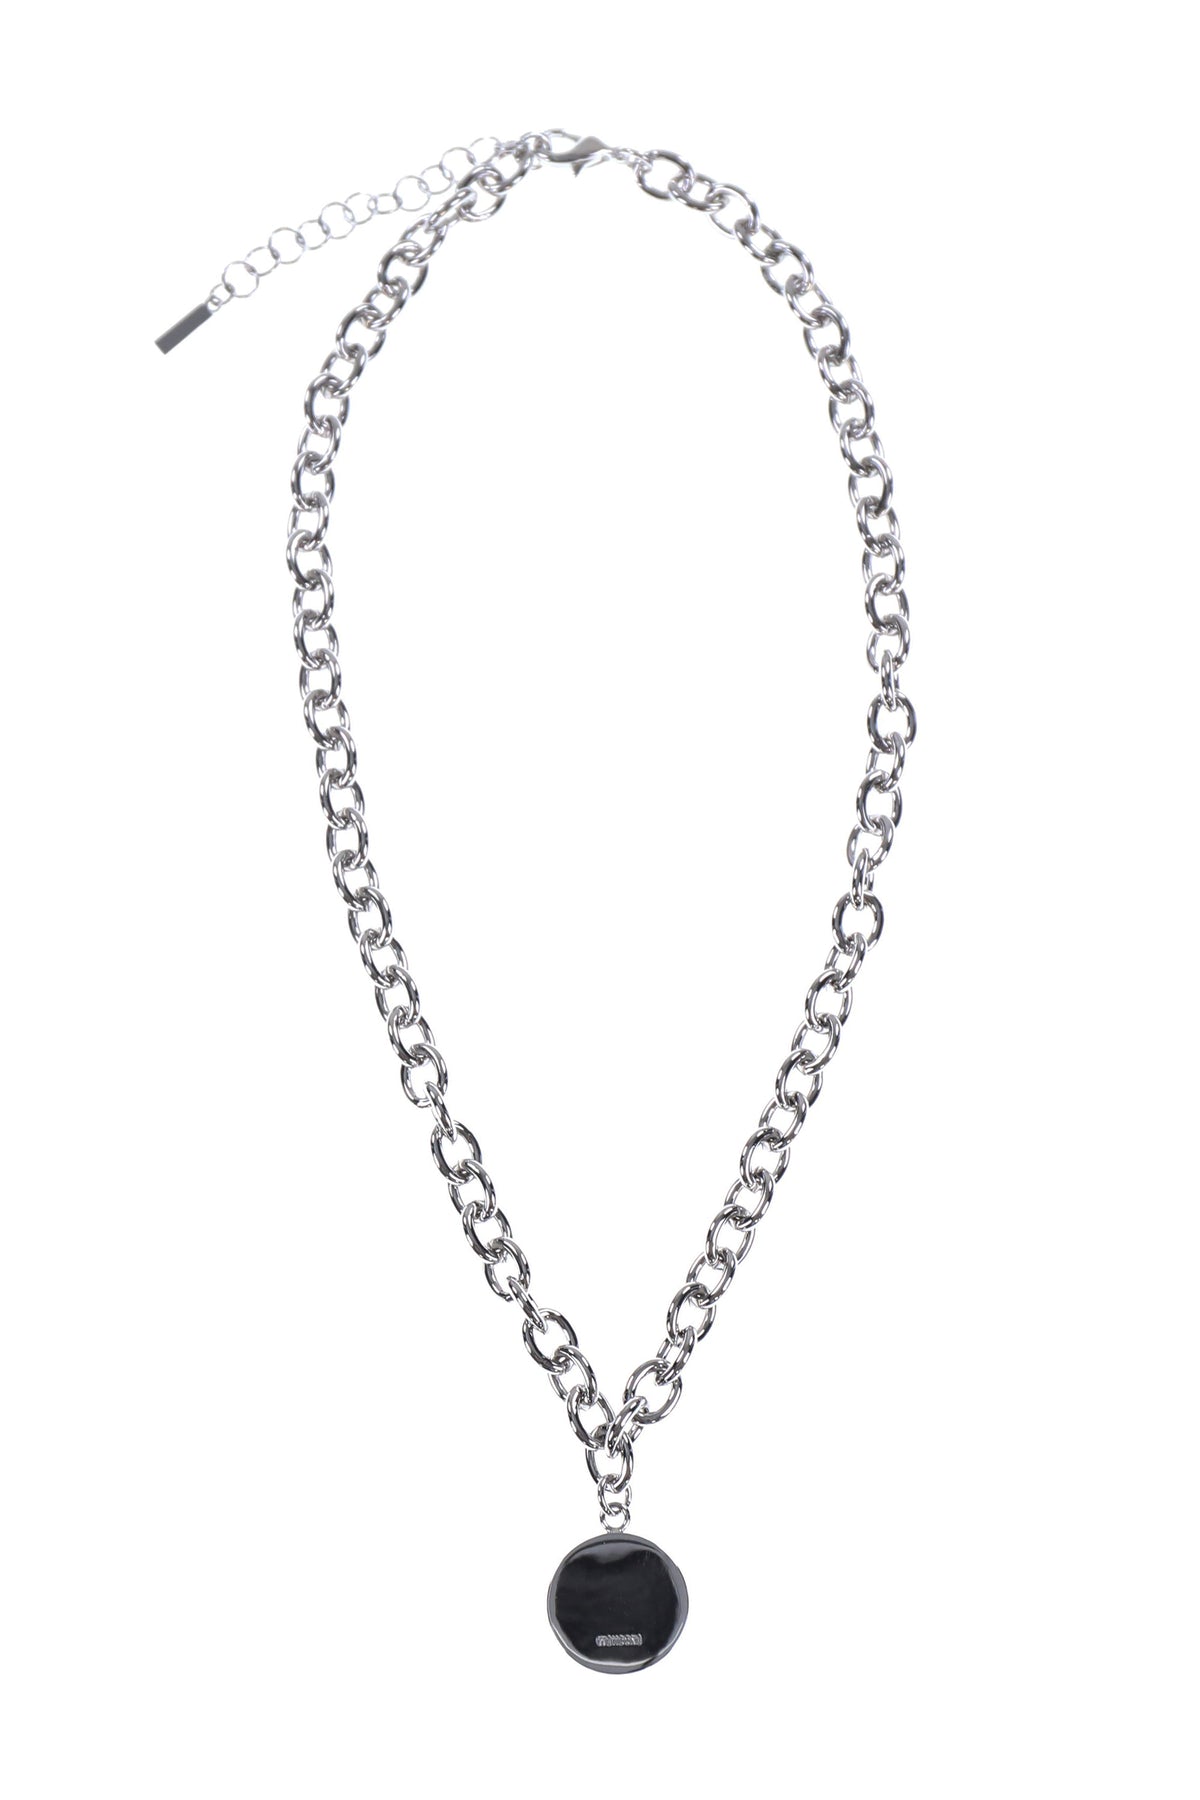 SMILEY CHAIN NECKLACE / SIL